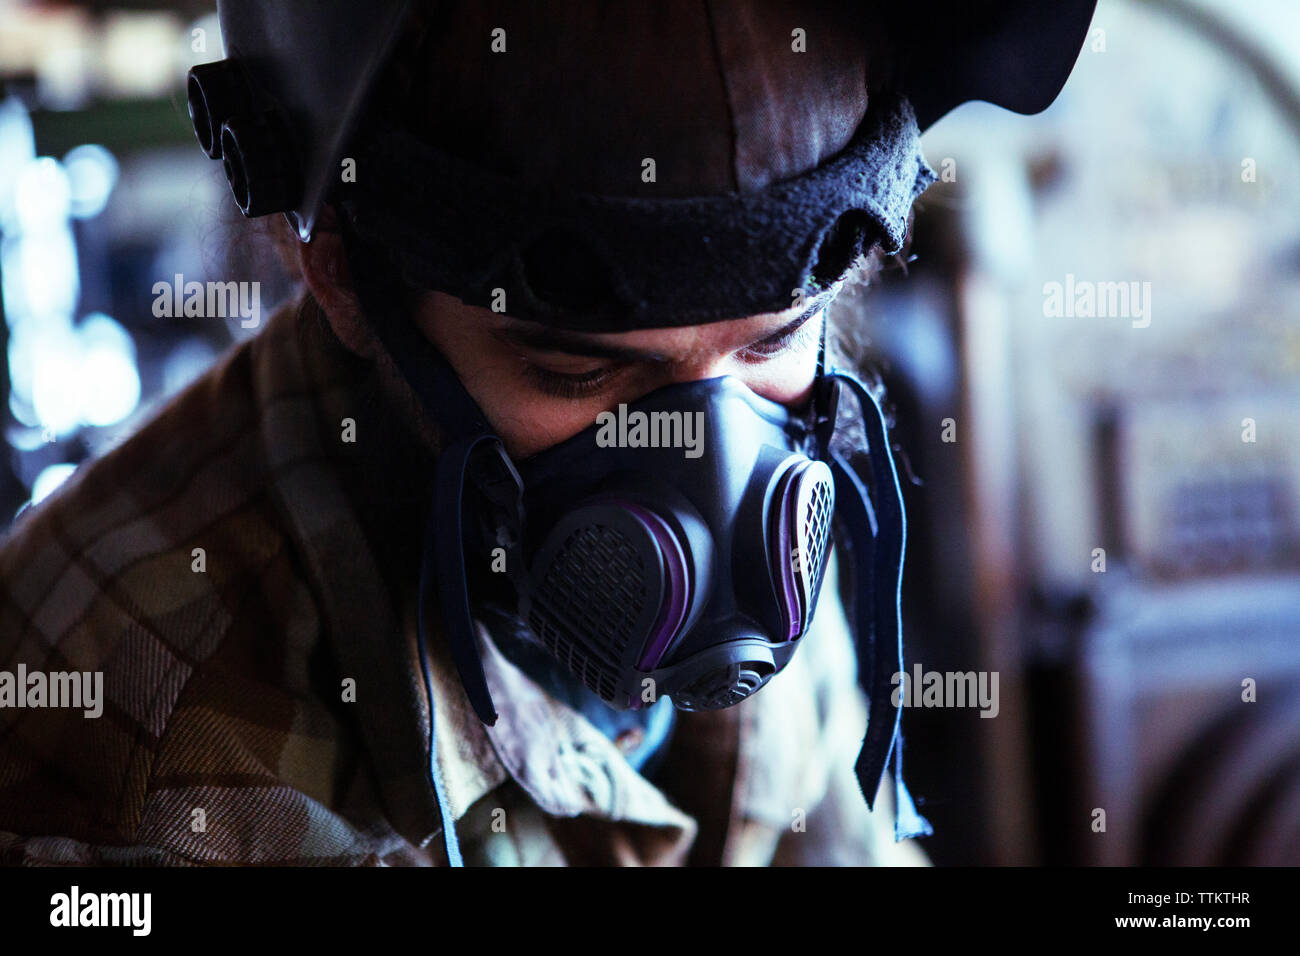 Worker in protective workwear at workshop Stock Photo